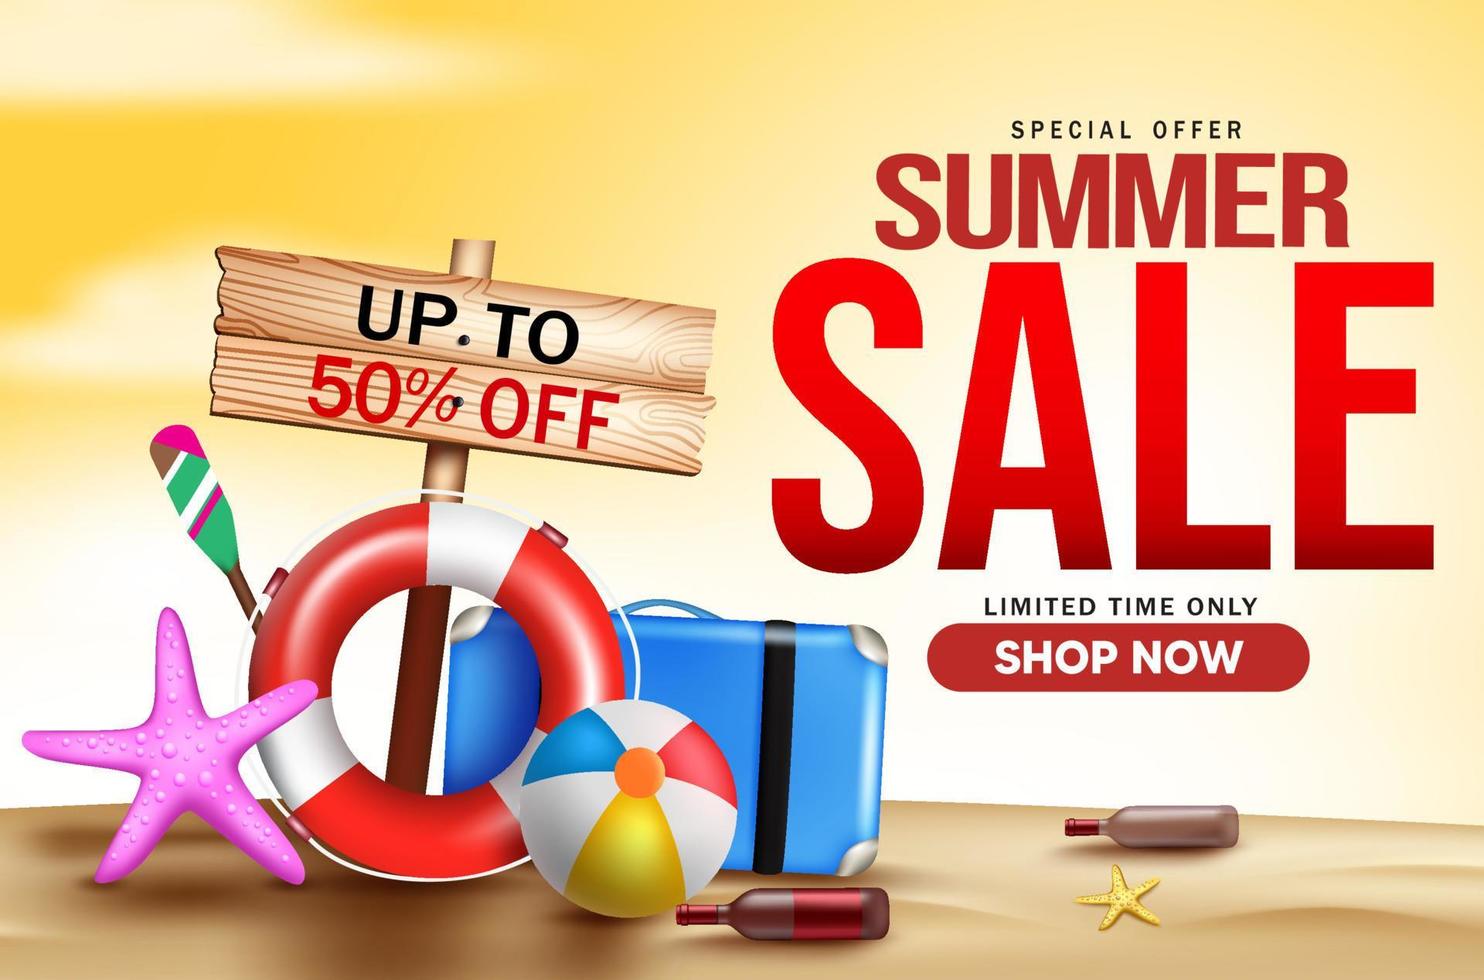 Summer sale vector banner design. Summer sale text for tropical season shopping promo advertisement with beach elements in sand background. Vector illustration